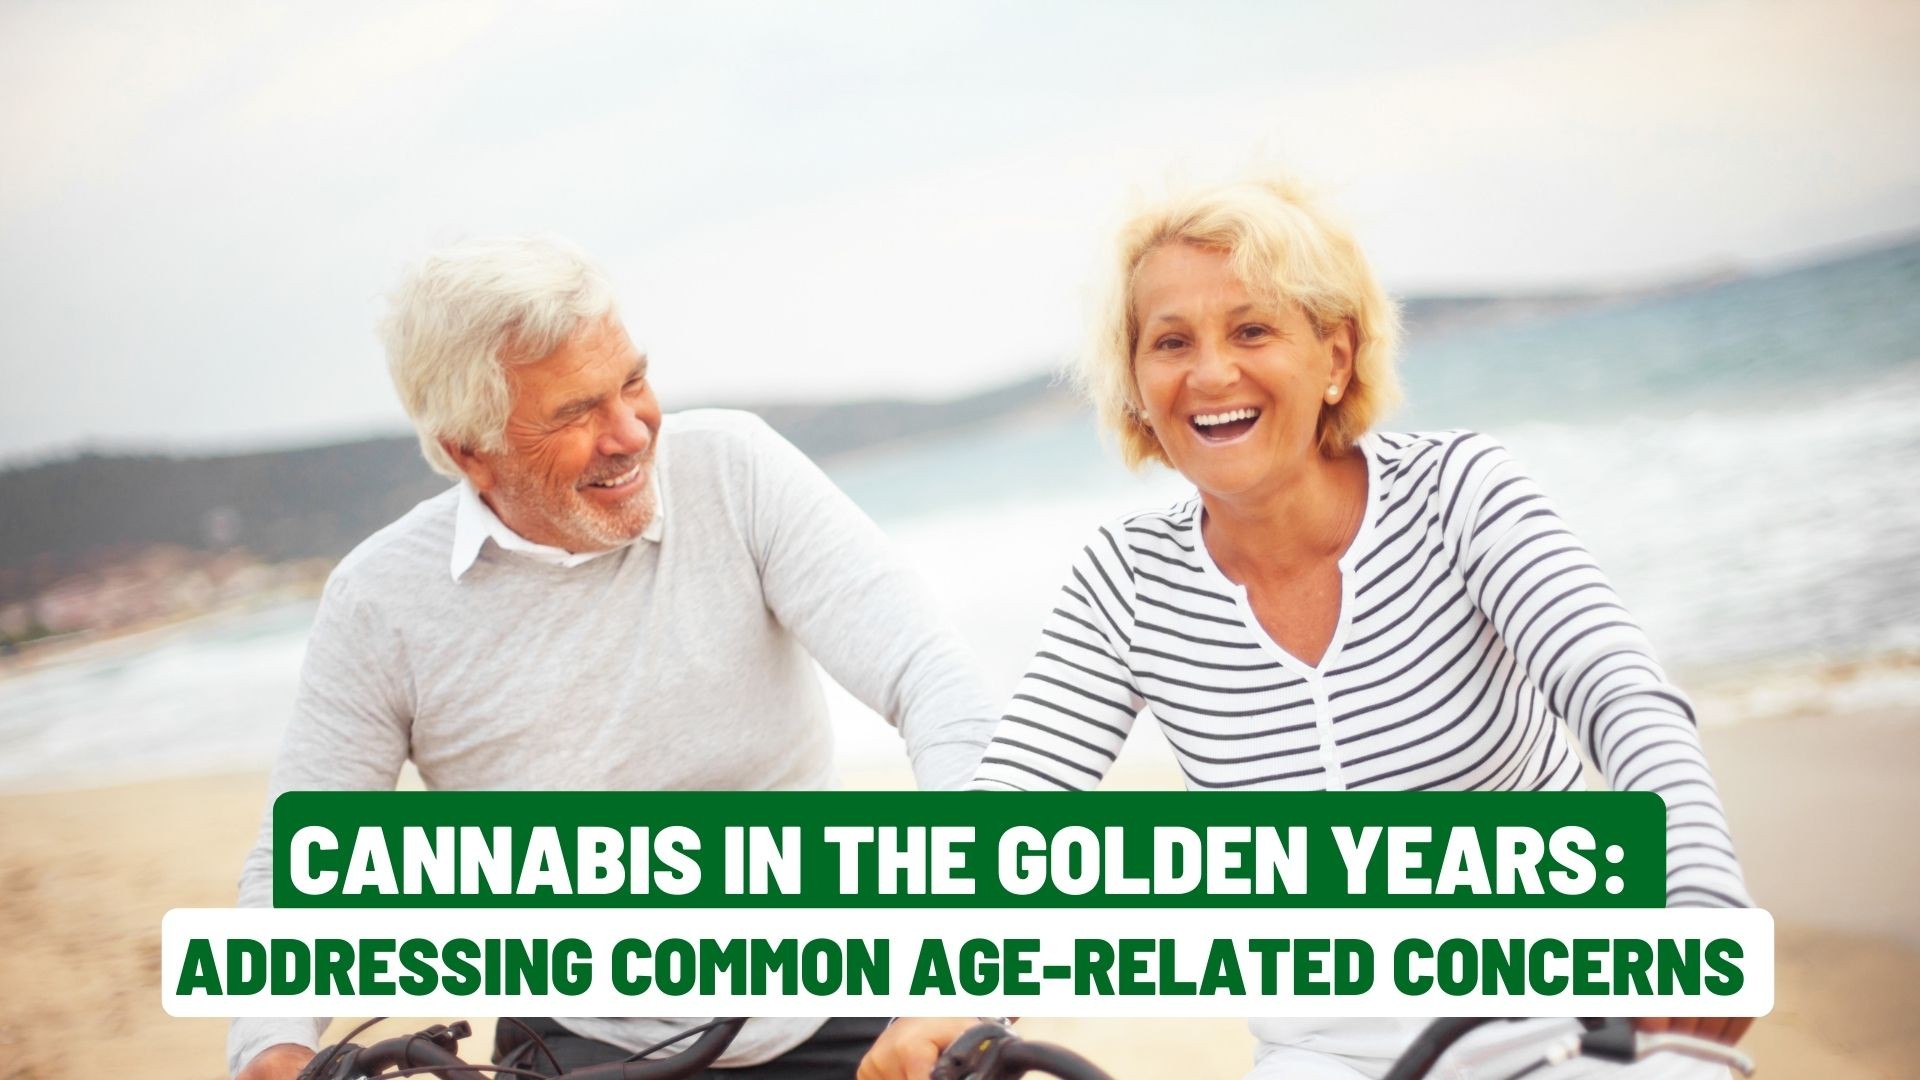 Cannabis in the Golden Years: Addressing Common Age-Related Concerns